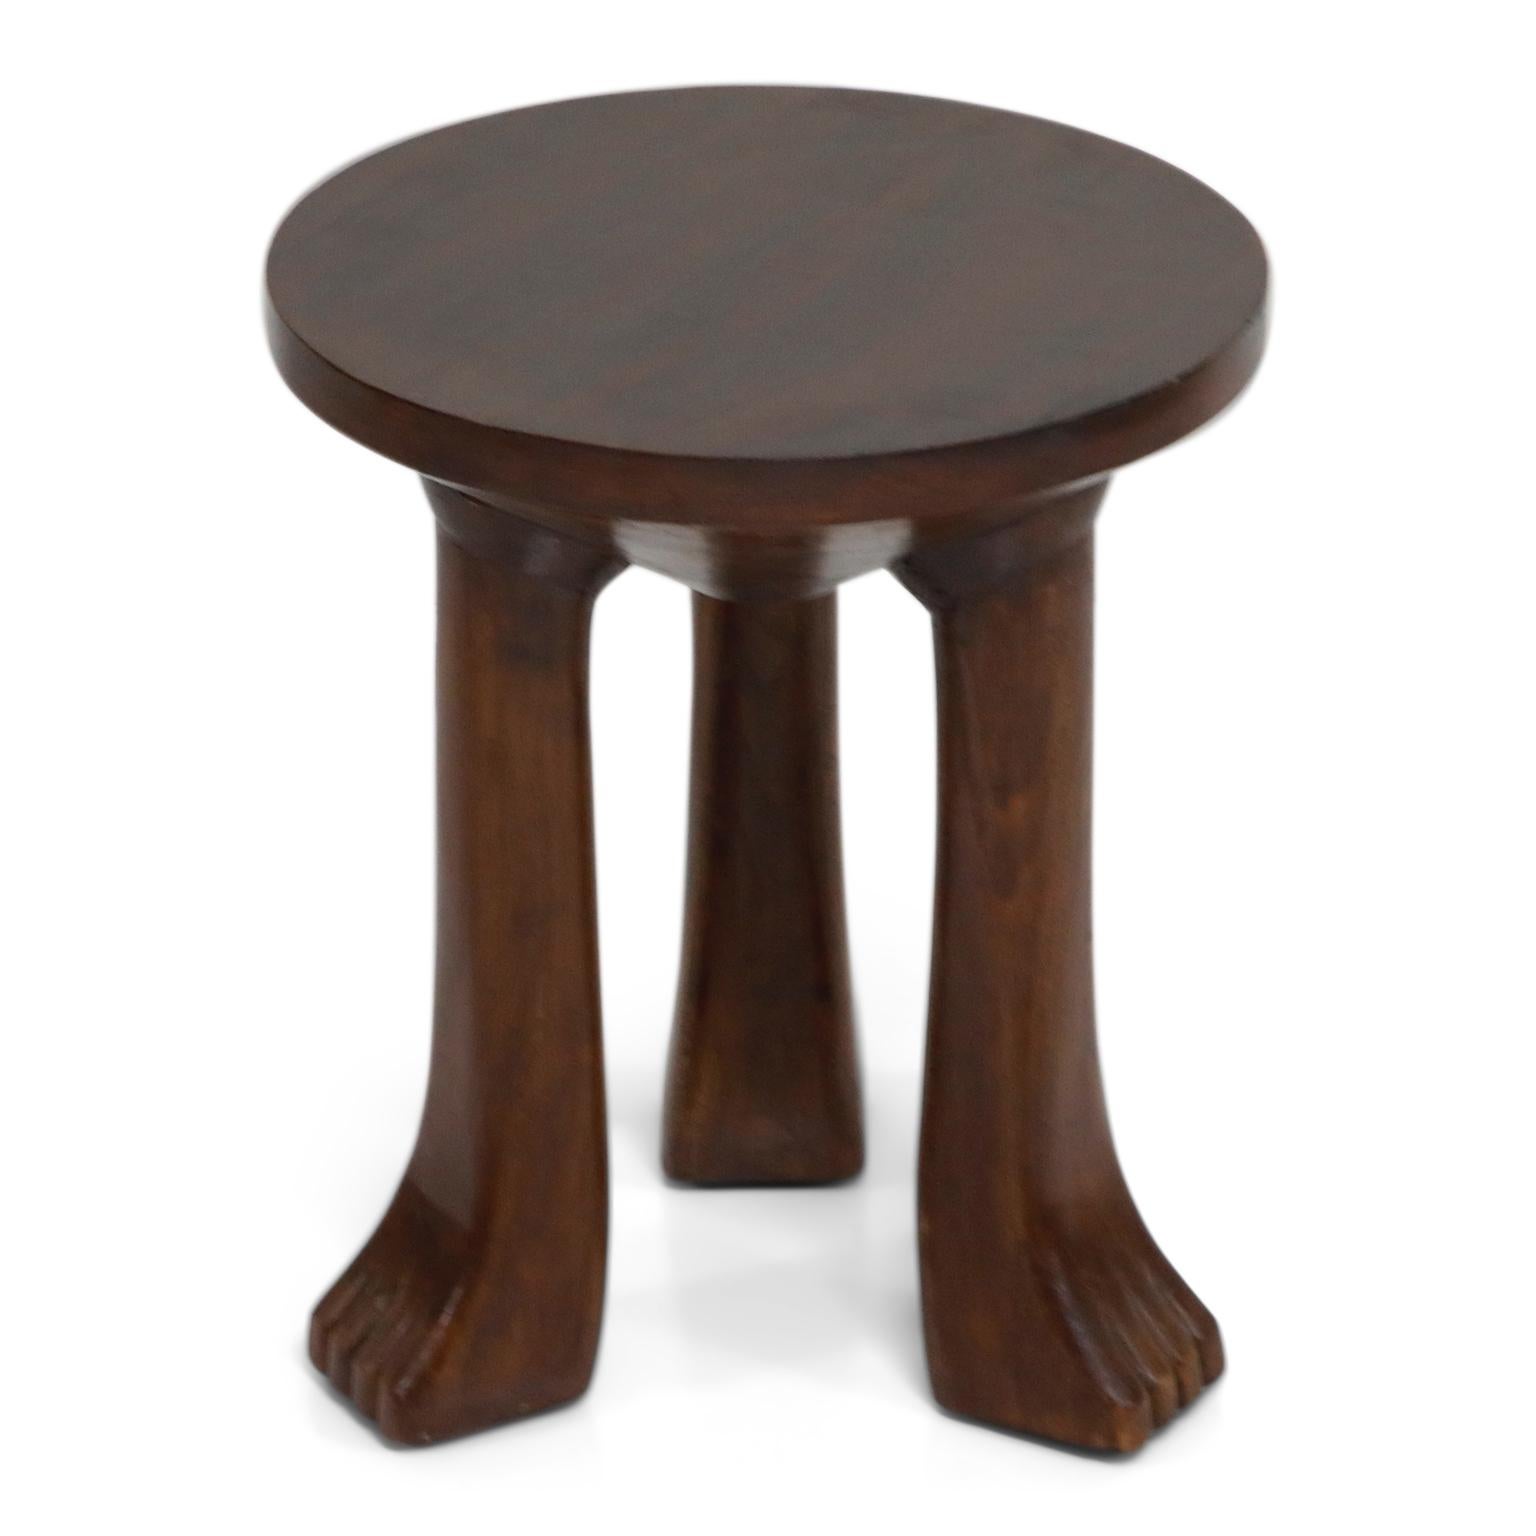 Late 20th Century Carved Teak Three-Legged Lionfoot Stools in the Style of John Dickinson